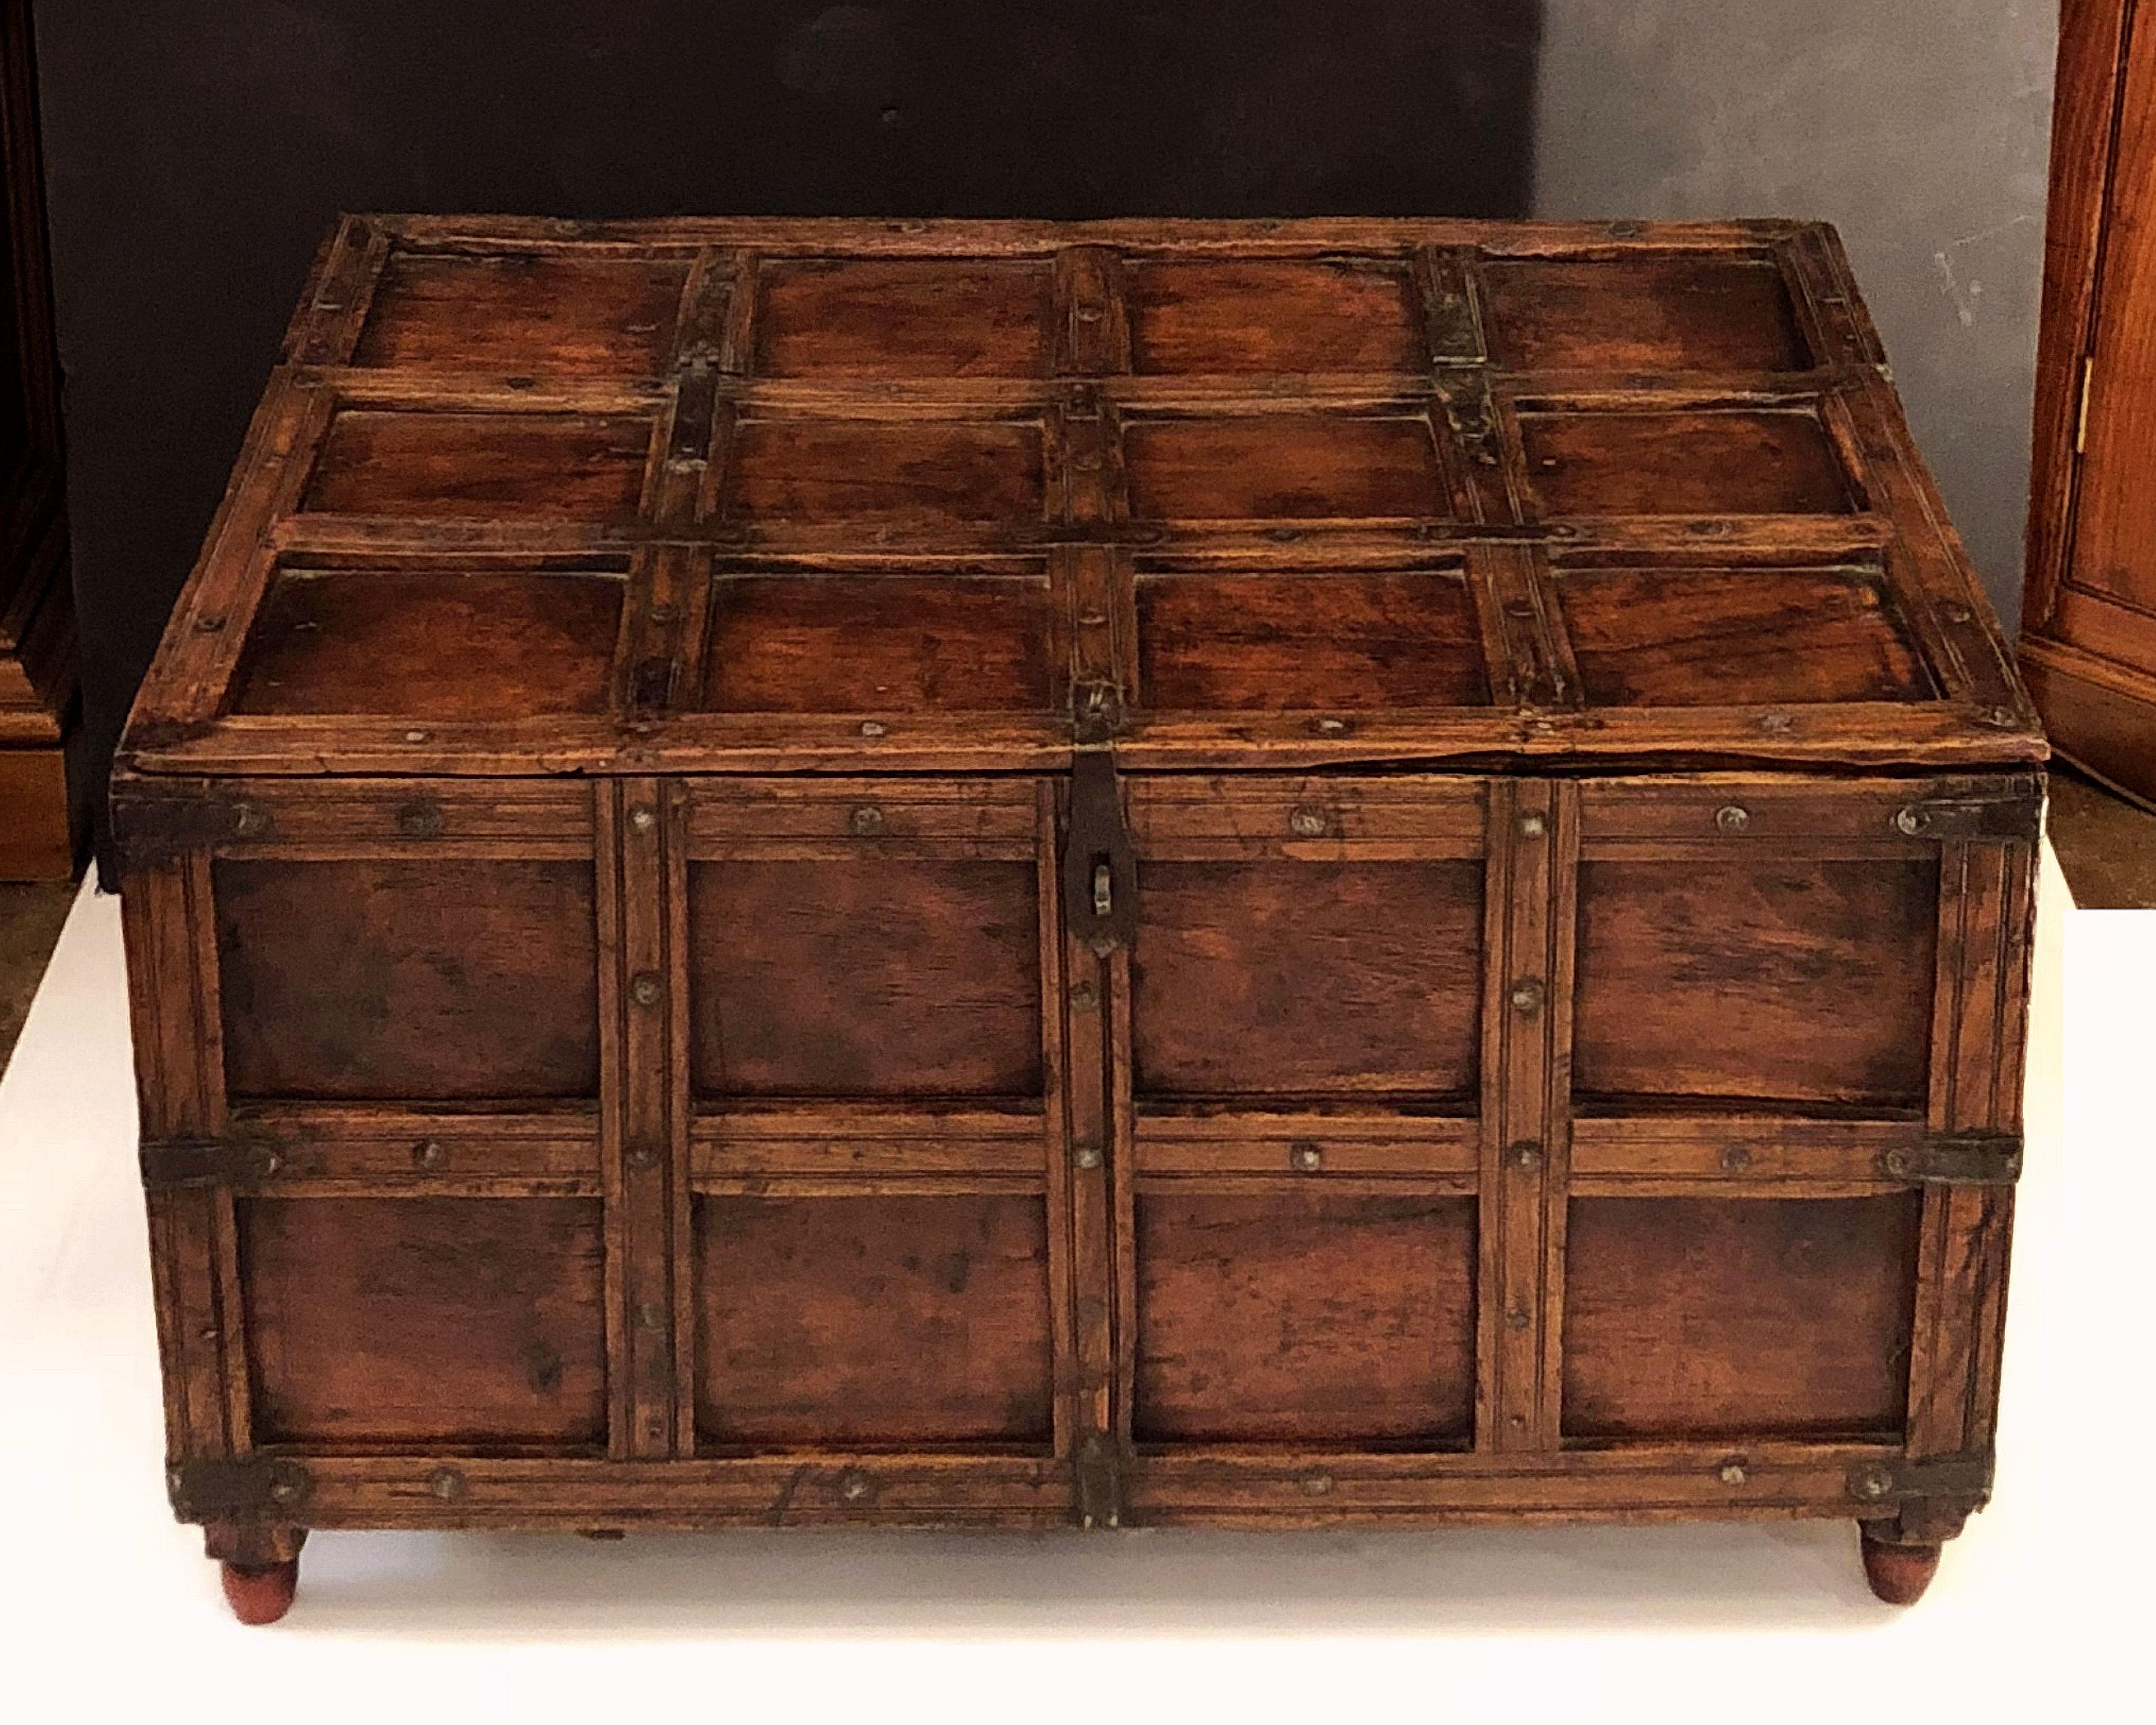 A handsome 19th century rectangular iron-bound wooden stick box trunk or coffer from British Colonial India featuring a hinged top hatch with storage inside. 

Traditionally used for patio storage in Indian havelis or for storing firewood in an